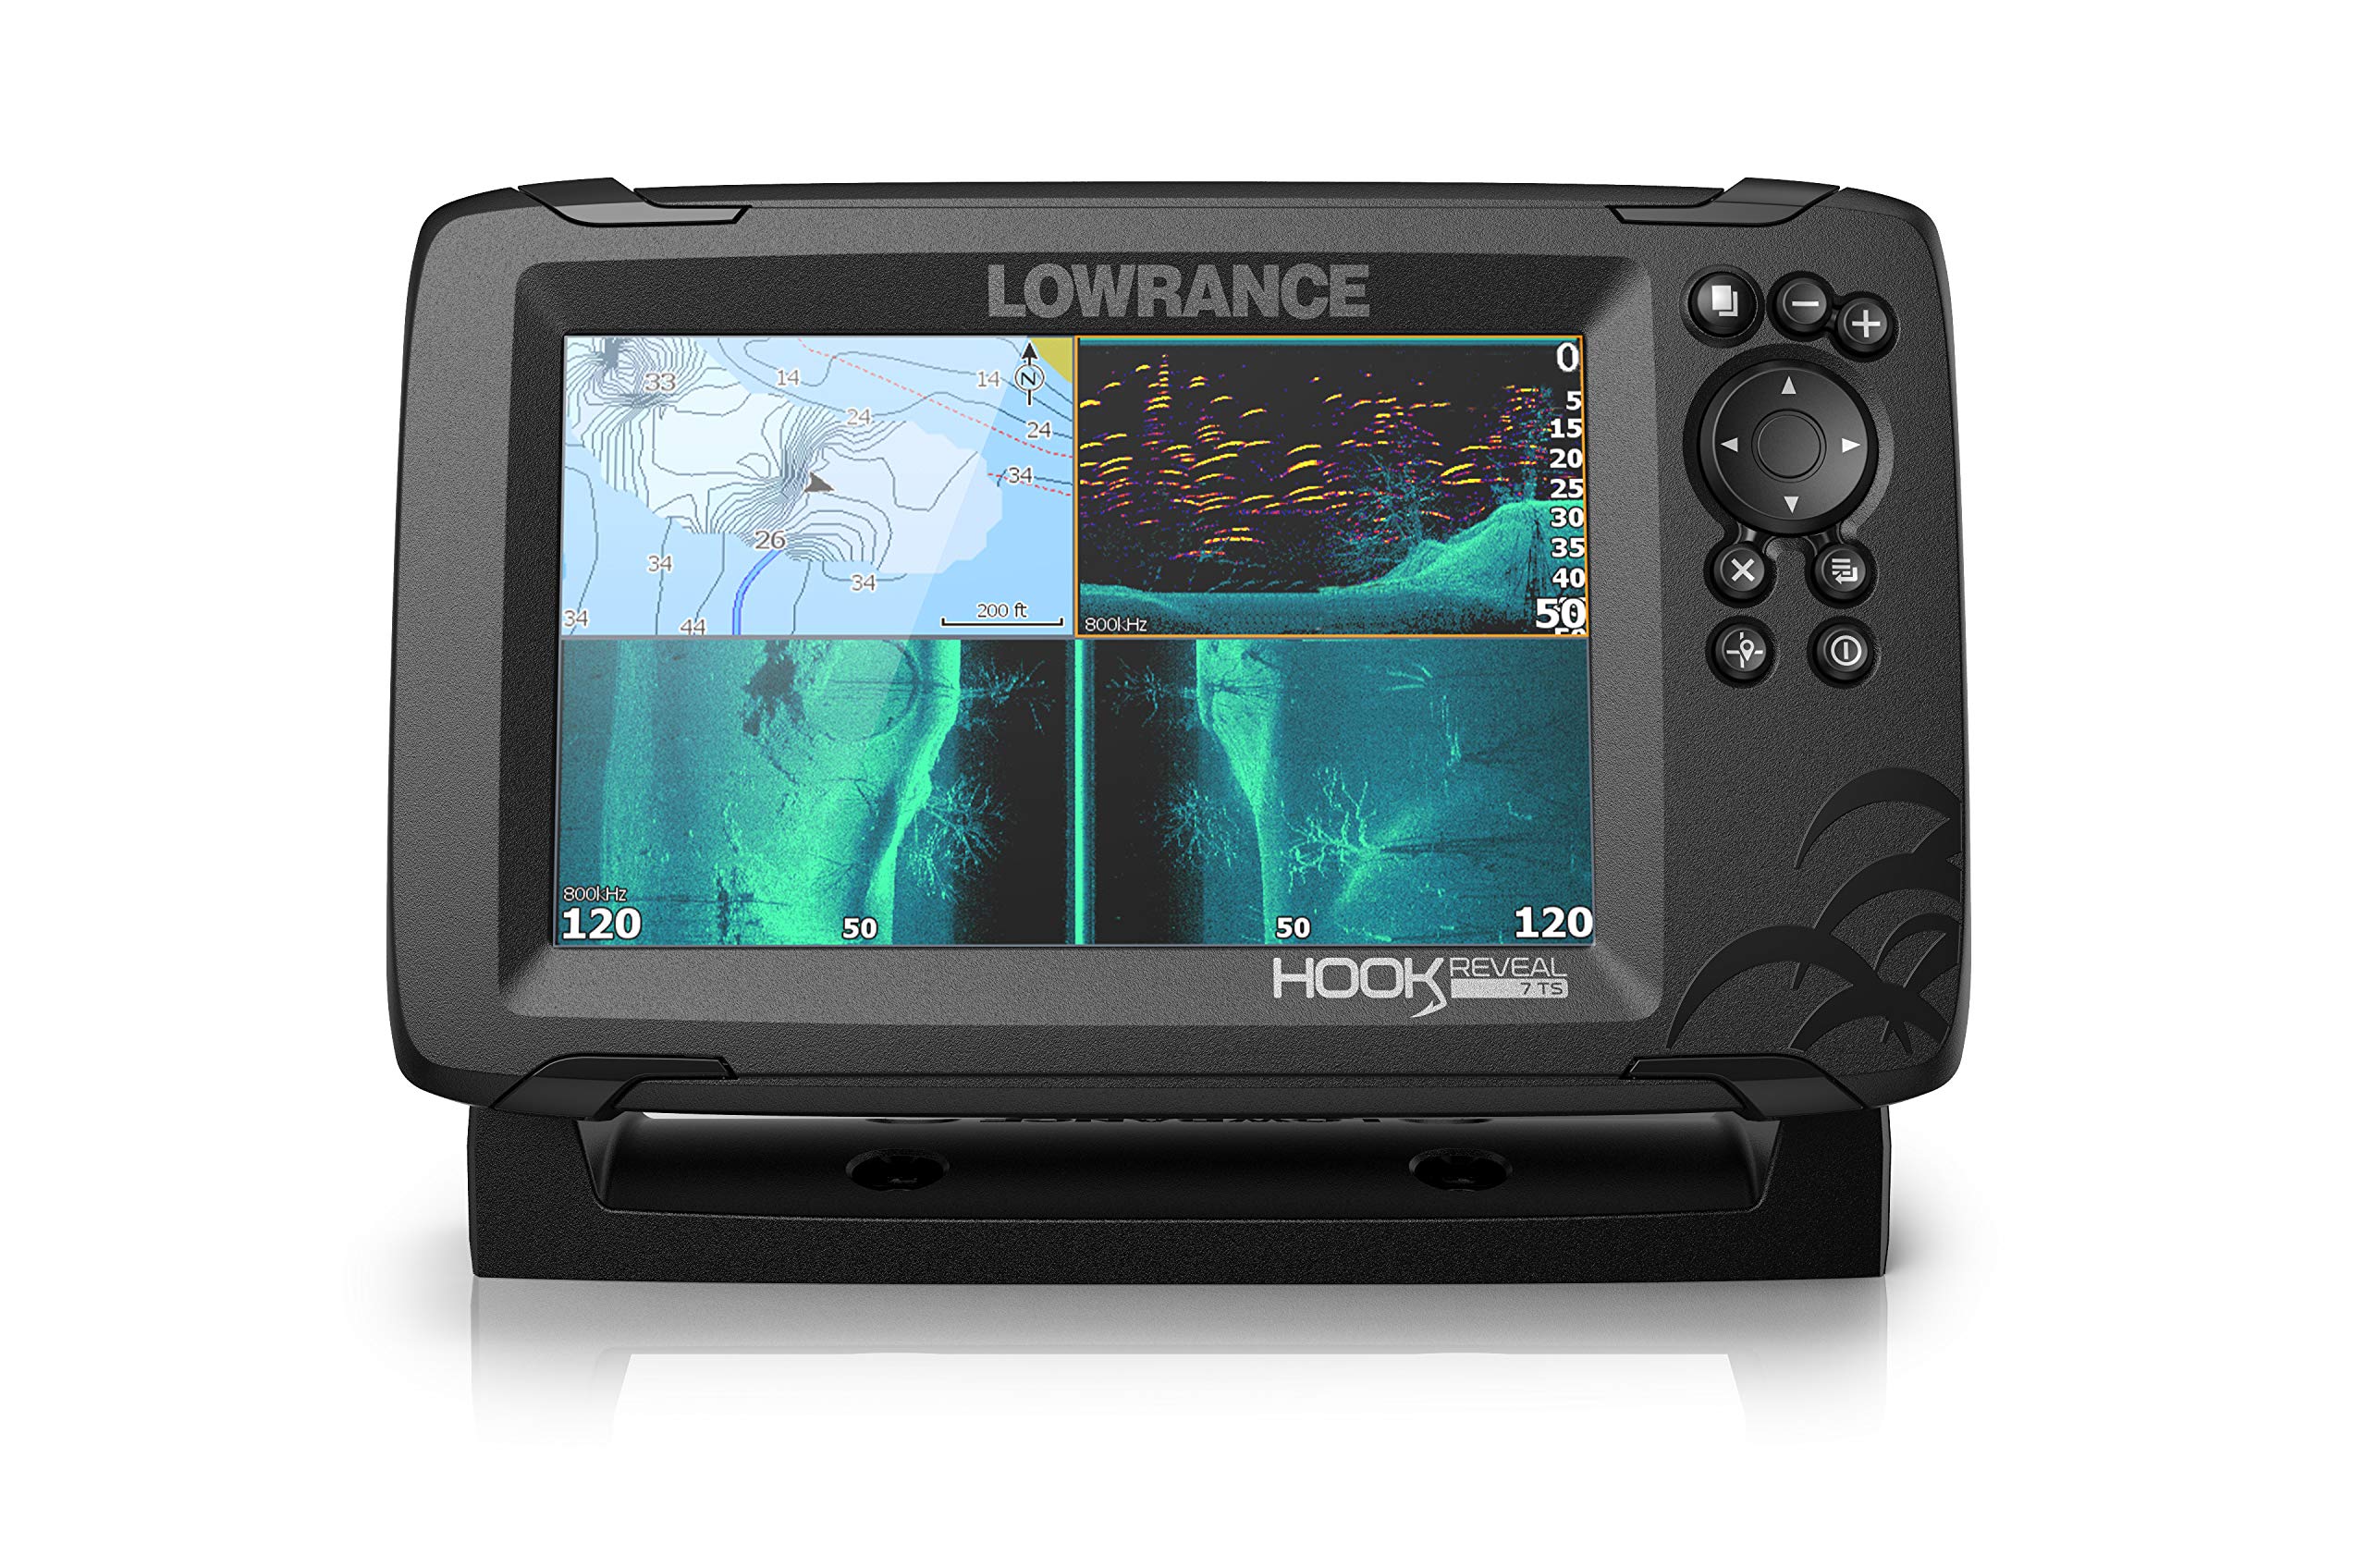 Lowrance Hook Reveal 7 Inch Fish Finders with Transducer, Plus Optional  Preloaded Maps 7 Tripleshot, C